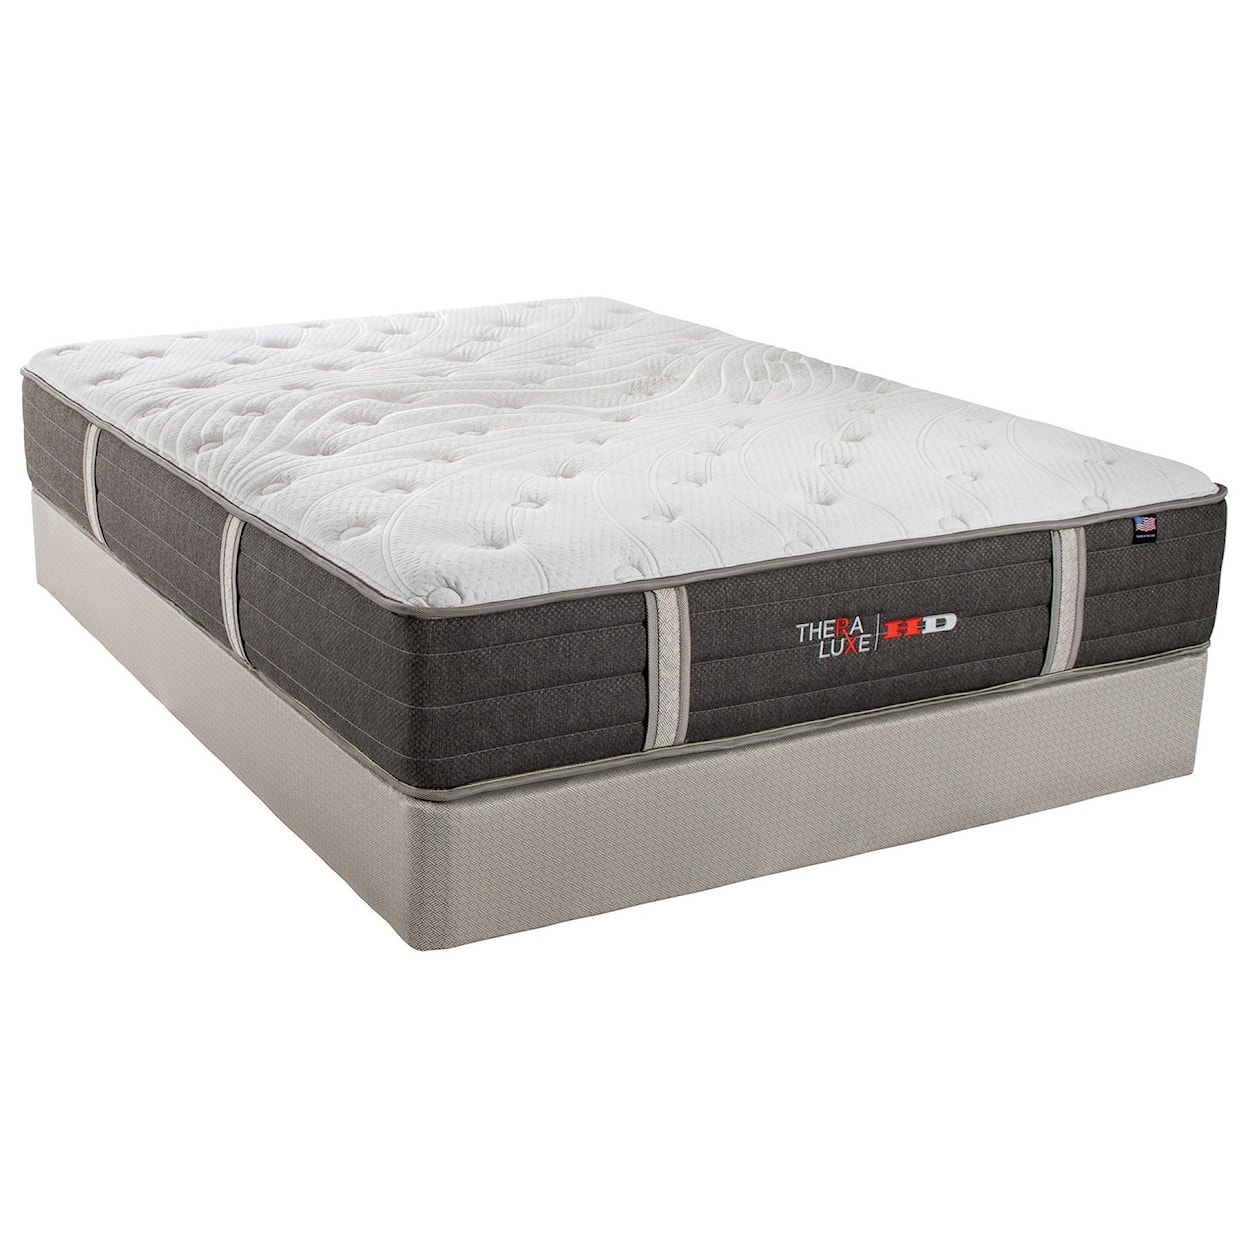 Therapedic Theraluxe Aspen Full Firm Pocketed Coil Mattress Set